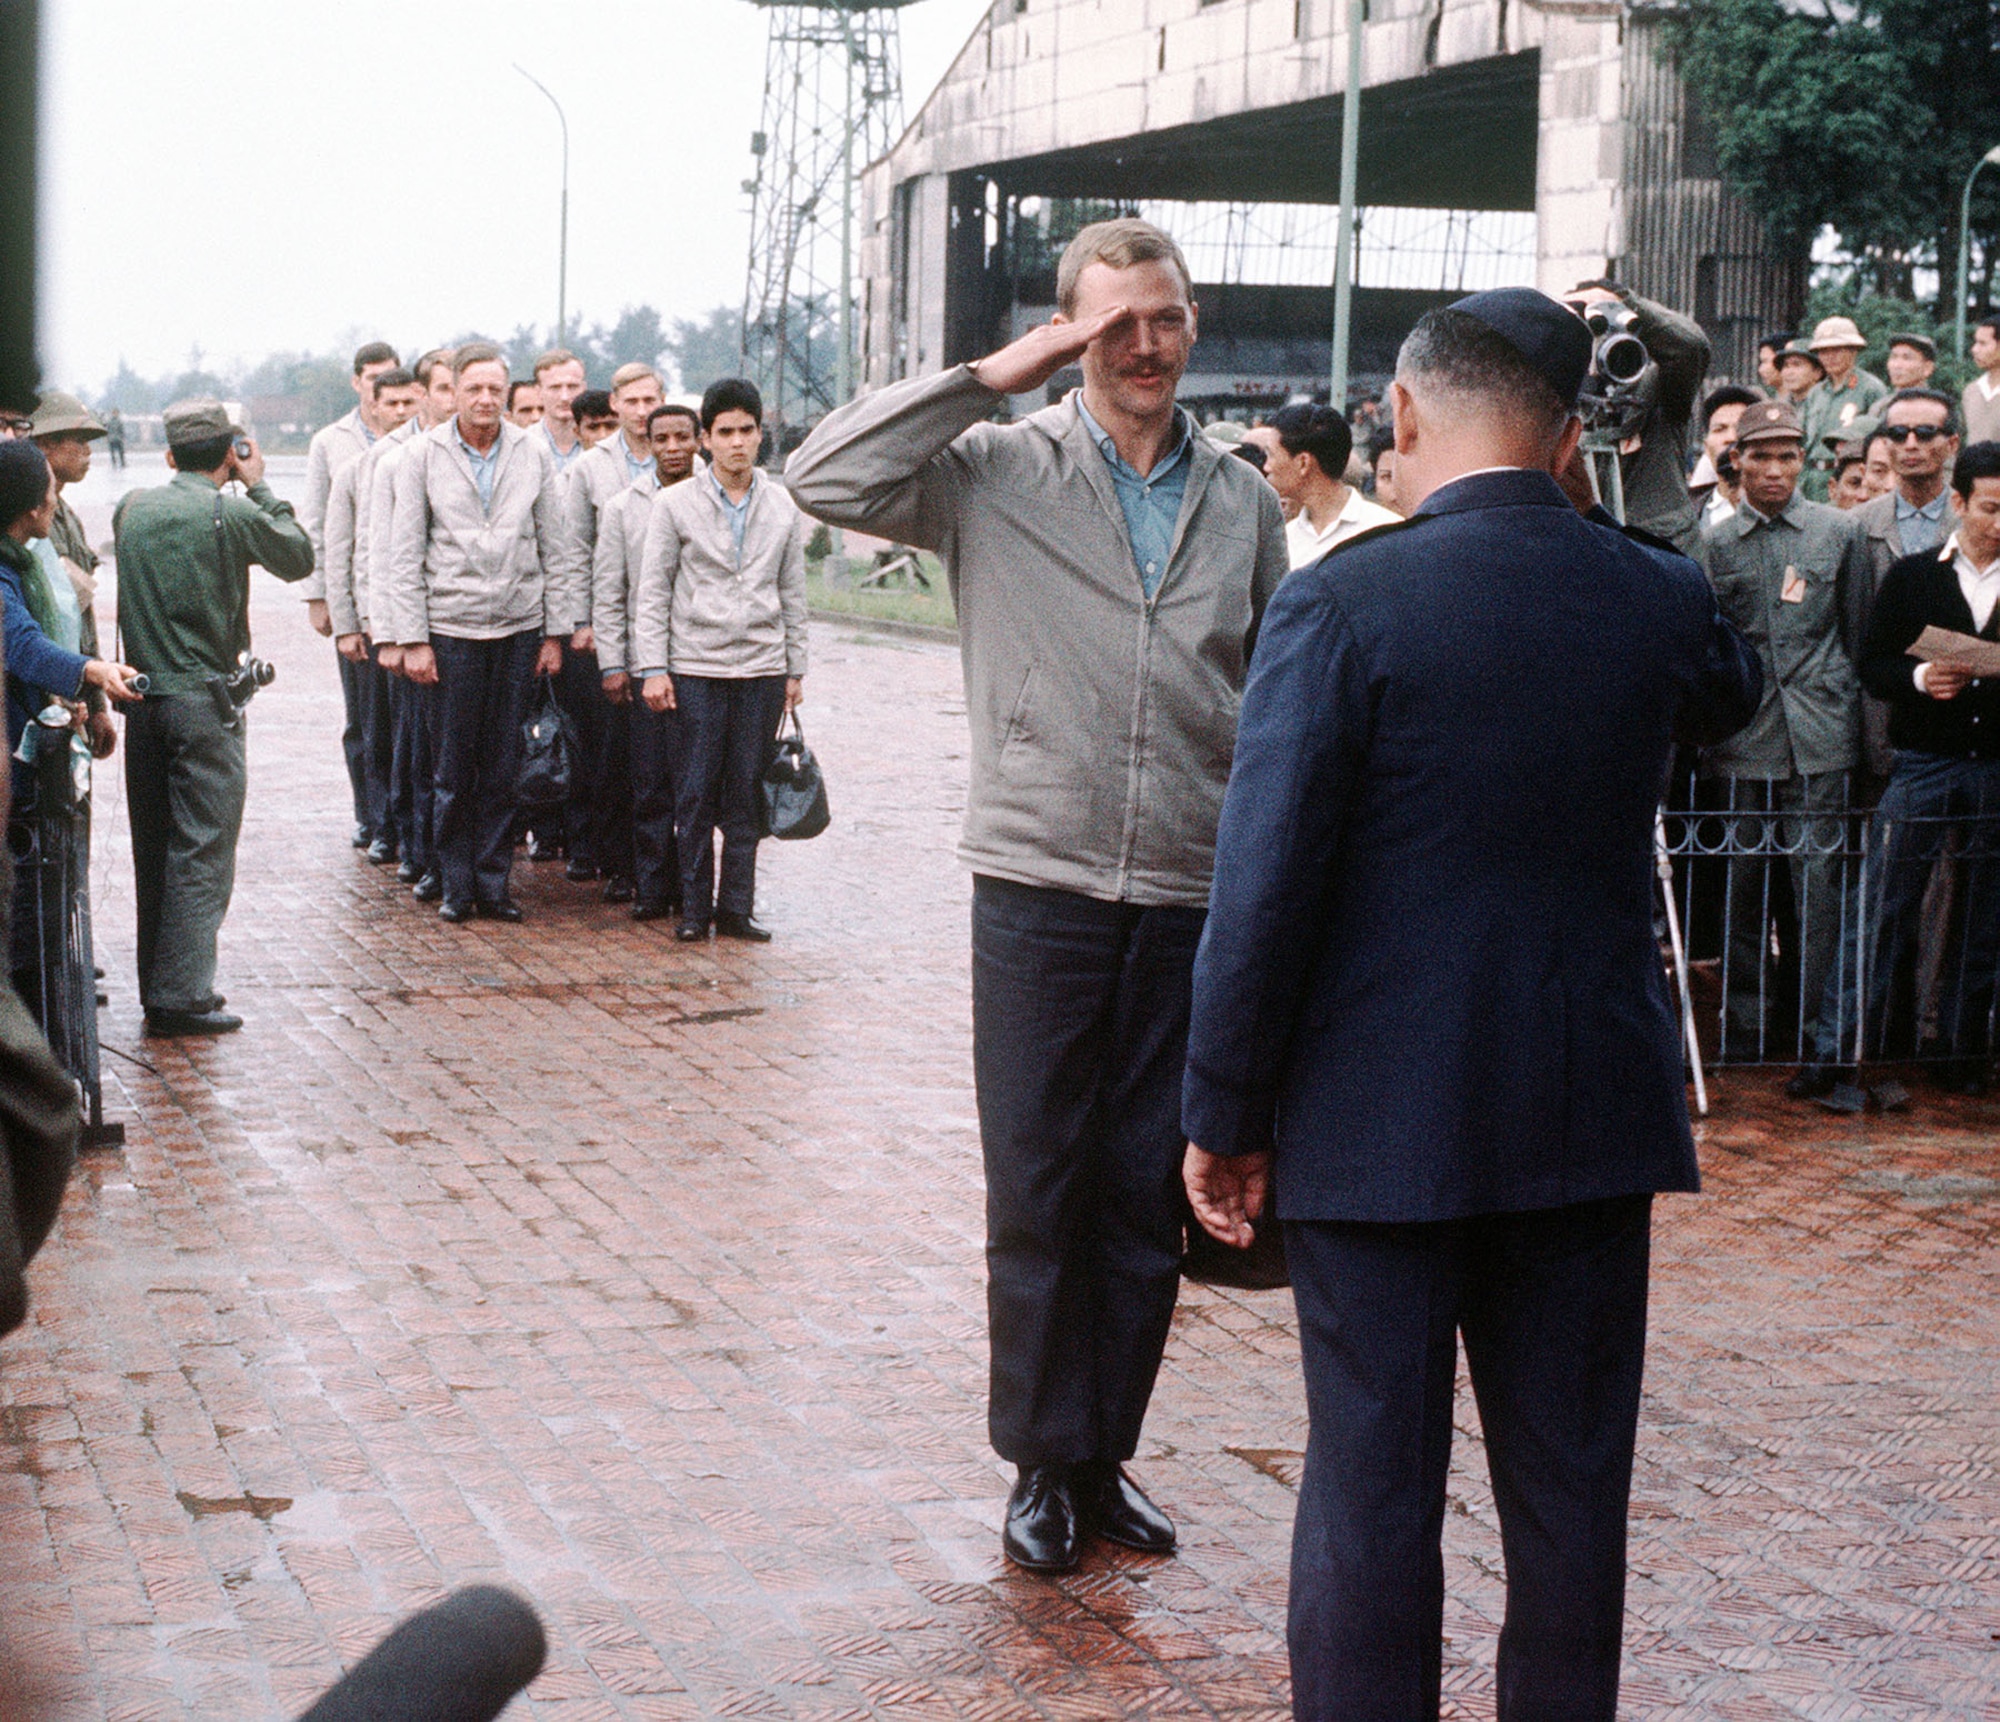 POWs regained their freedom and displayed proud military bearing, arriving at Gia Lam Airport in formation. Here, USAF Capt. Robert Parsels salutes as he is returned to U.S. military control. (U.S. Air Force photo)